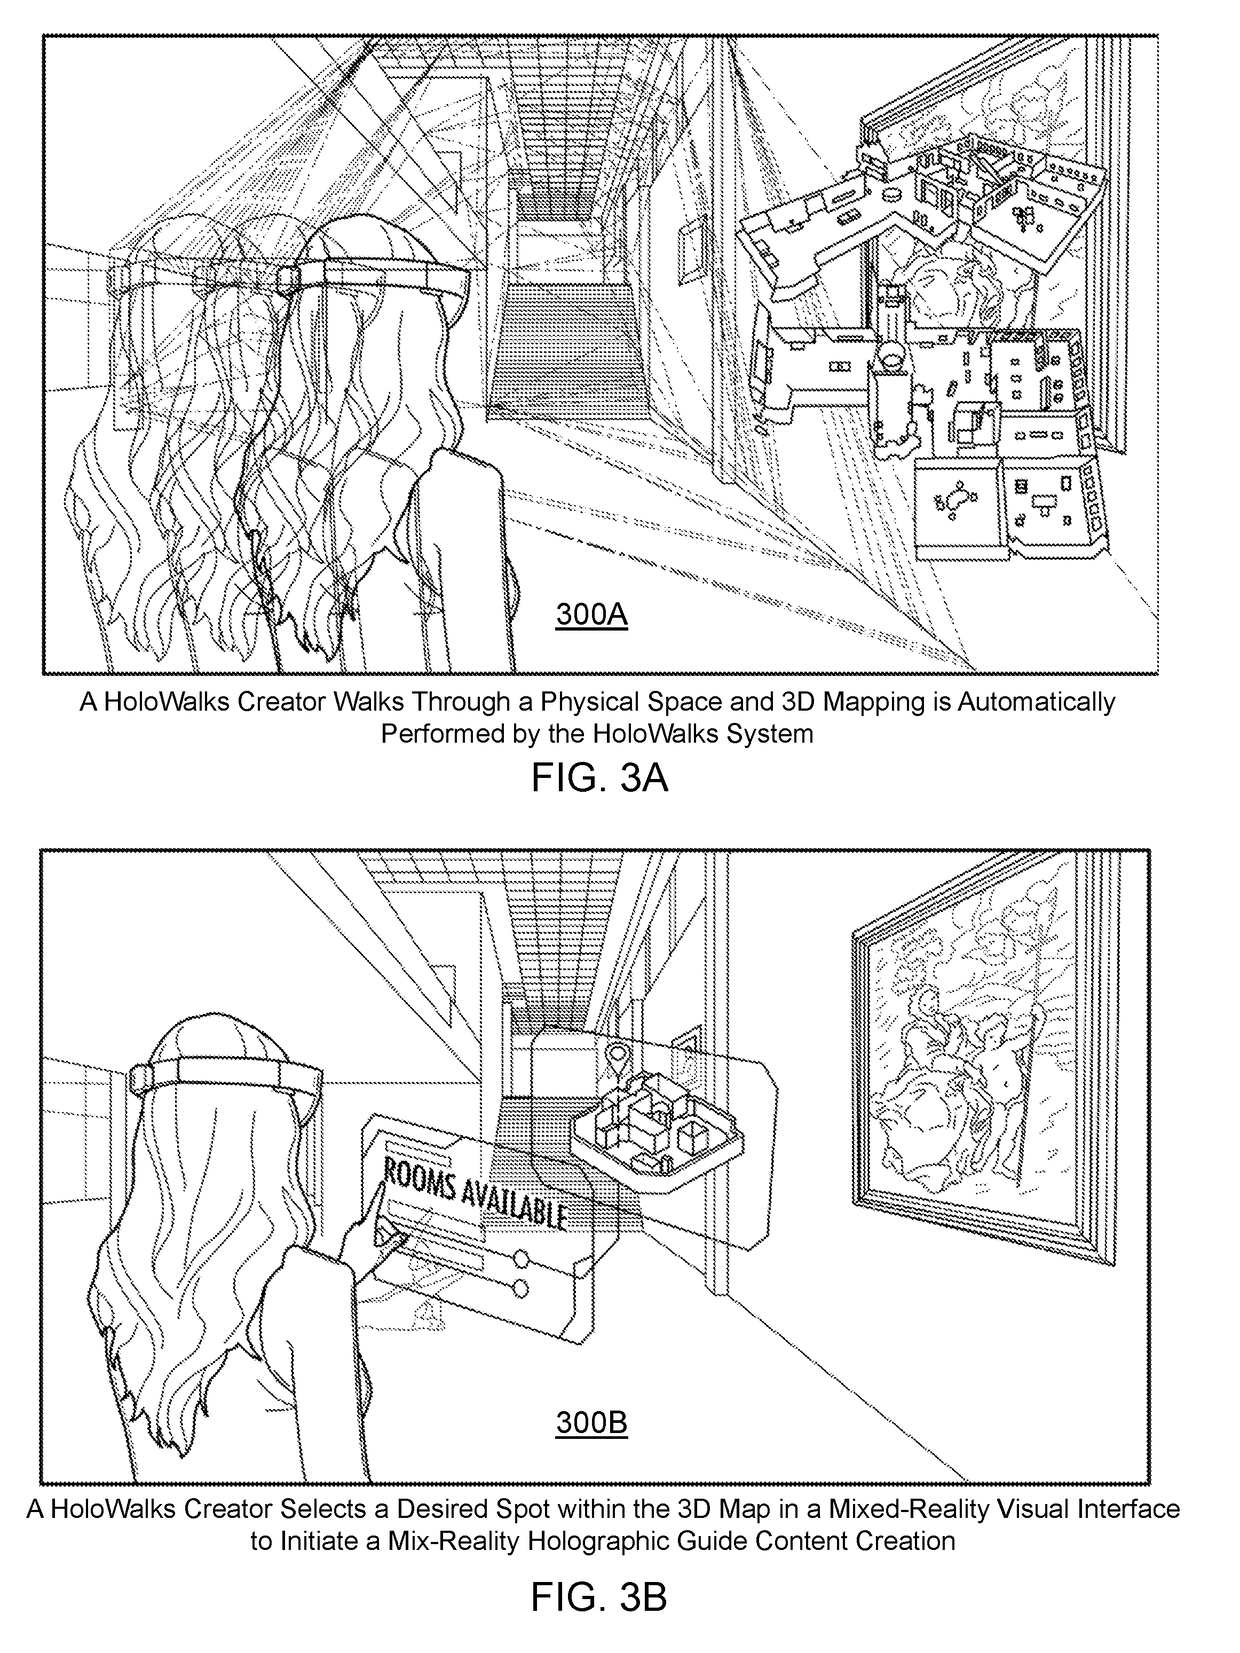 Electronic System and Method for Three-Dimensional Mixed-Reality Space and Experience Construction and Sharing